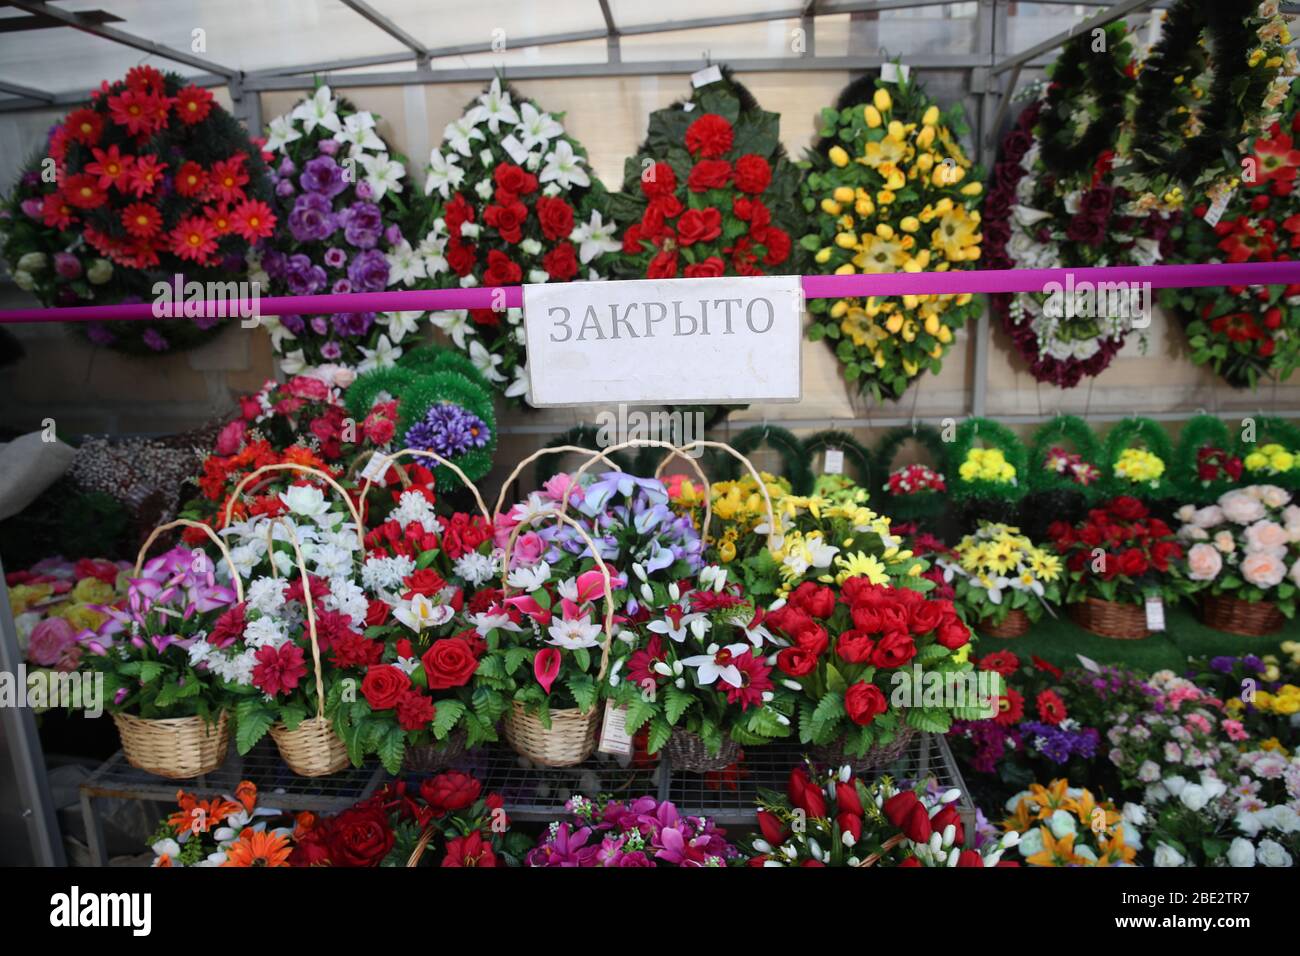 Moscow Russia 11th Apr 2020 Artificial Flowers On Sale At The Vagankovskoye Cemetery Moscow Cemeteries Are